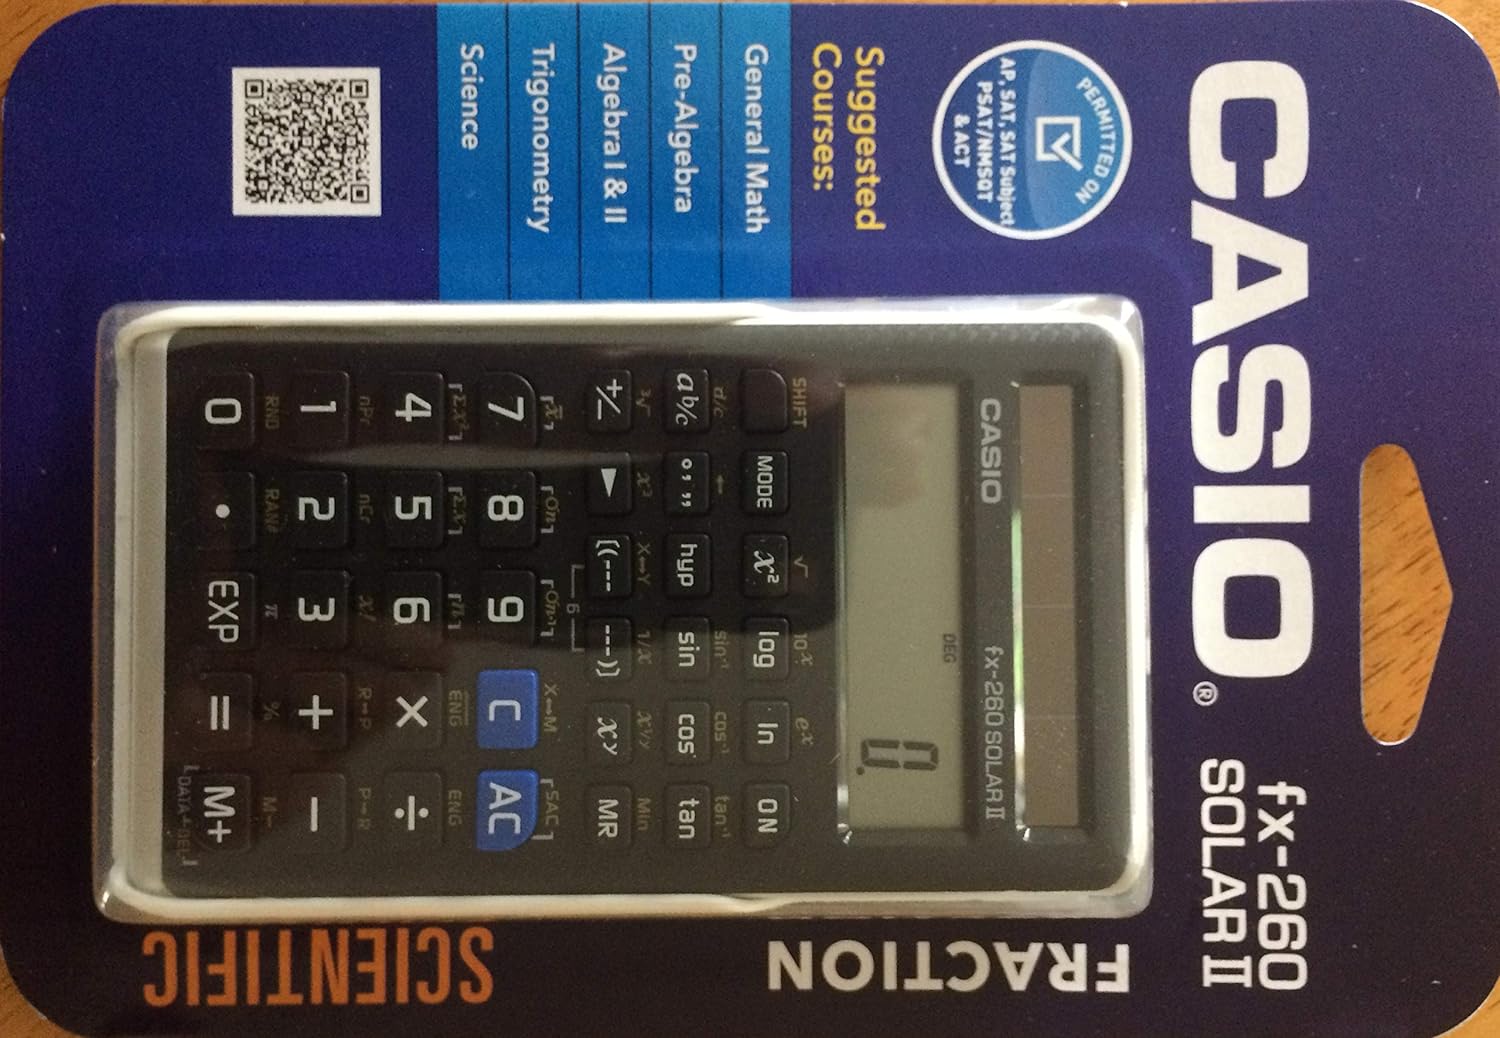 Comparing and Reviewing 5 Calculators: Gold, Solar Battery, Dual Powered, Tilted LCD, Casio FX